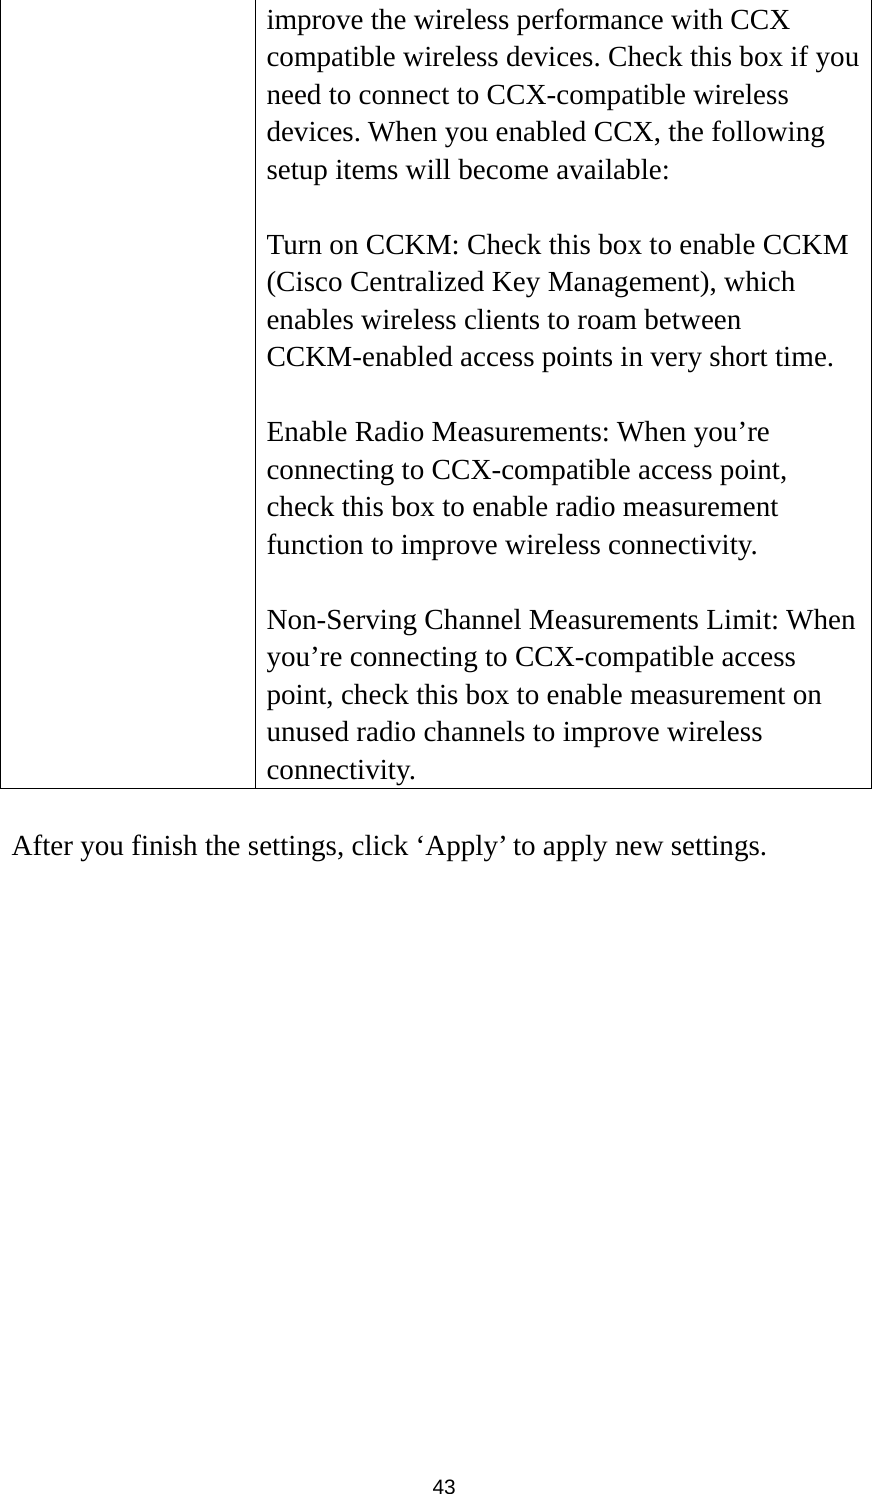  43 improve the wireless performance with CCX compatible wireless devices. Check this box if you need to connect to CCX-compatible wireless devices. When you enabled CCX, the following setup items will become available:  Turn on CCKM: Check this box to enable CCKM (Cisco Centralized Key Management), which enables wireless clients to roam between CCKM-enabled access points in very short time.  Enable Radio Measurements: When you’re connecting to CCX-compatible access point, check this box to enable radio measurement function to improve wireless connectivity.  Non-Serving Channel Measurements Limit: When you’re connecting to CCX-compatible access point, check this box to enable measurement on unused radio channels to improve wireless connectivity.  After you finish the settings, click ‘Apply’ to apply new settings.  